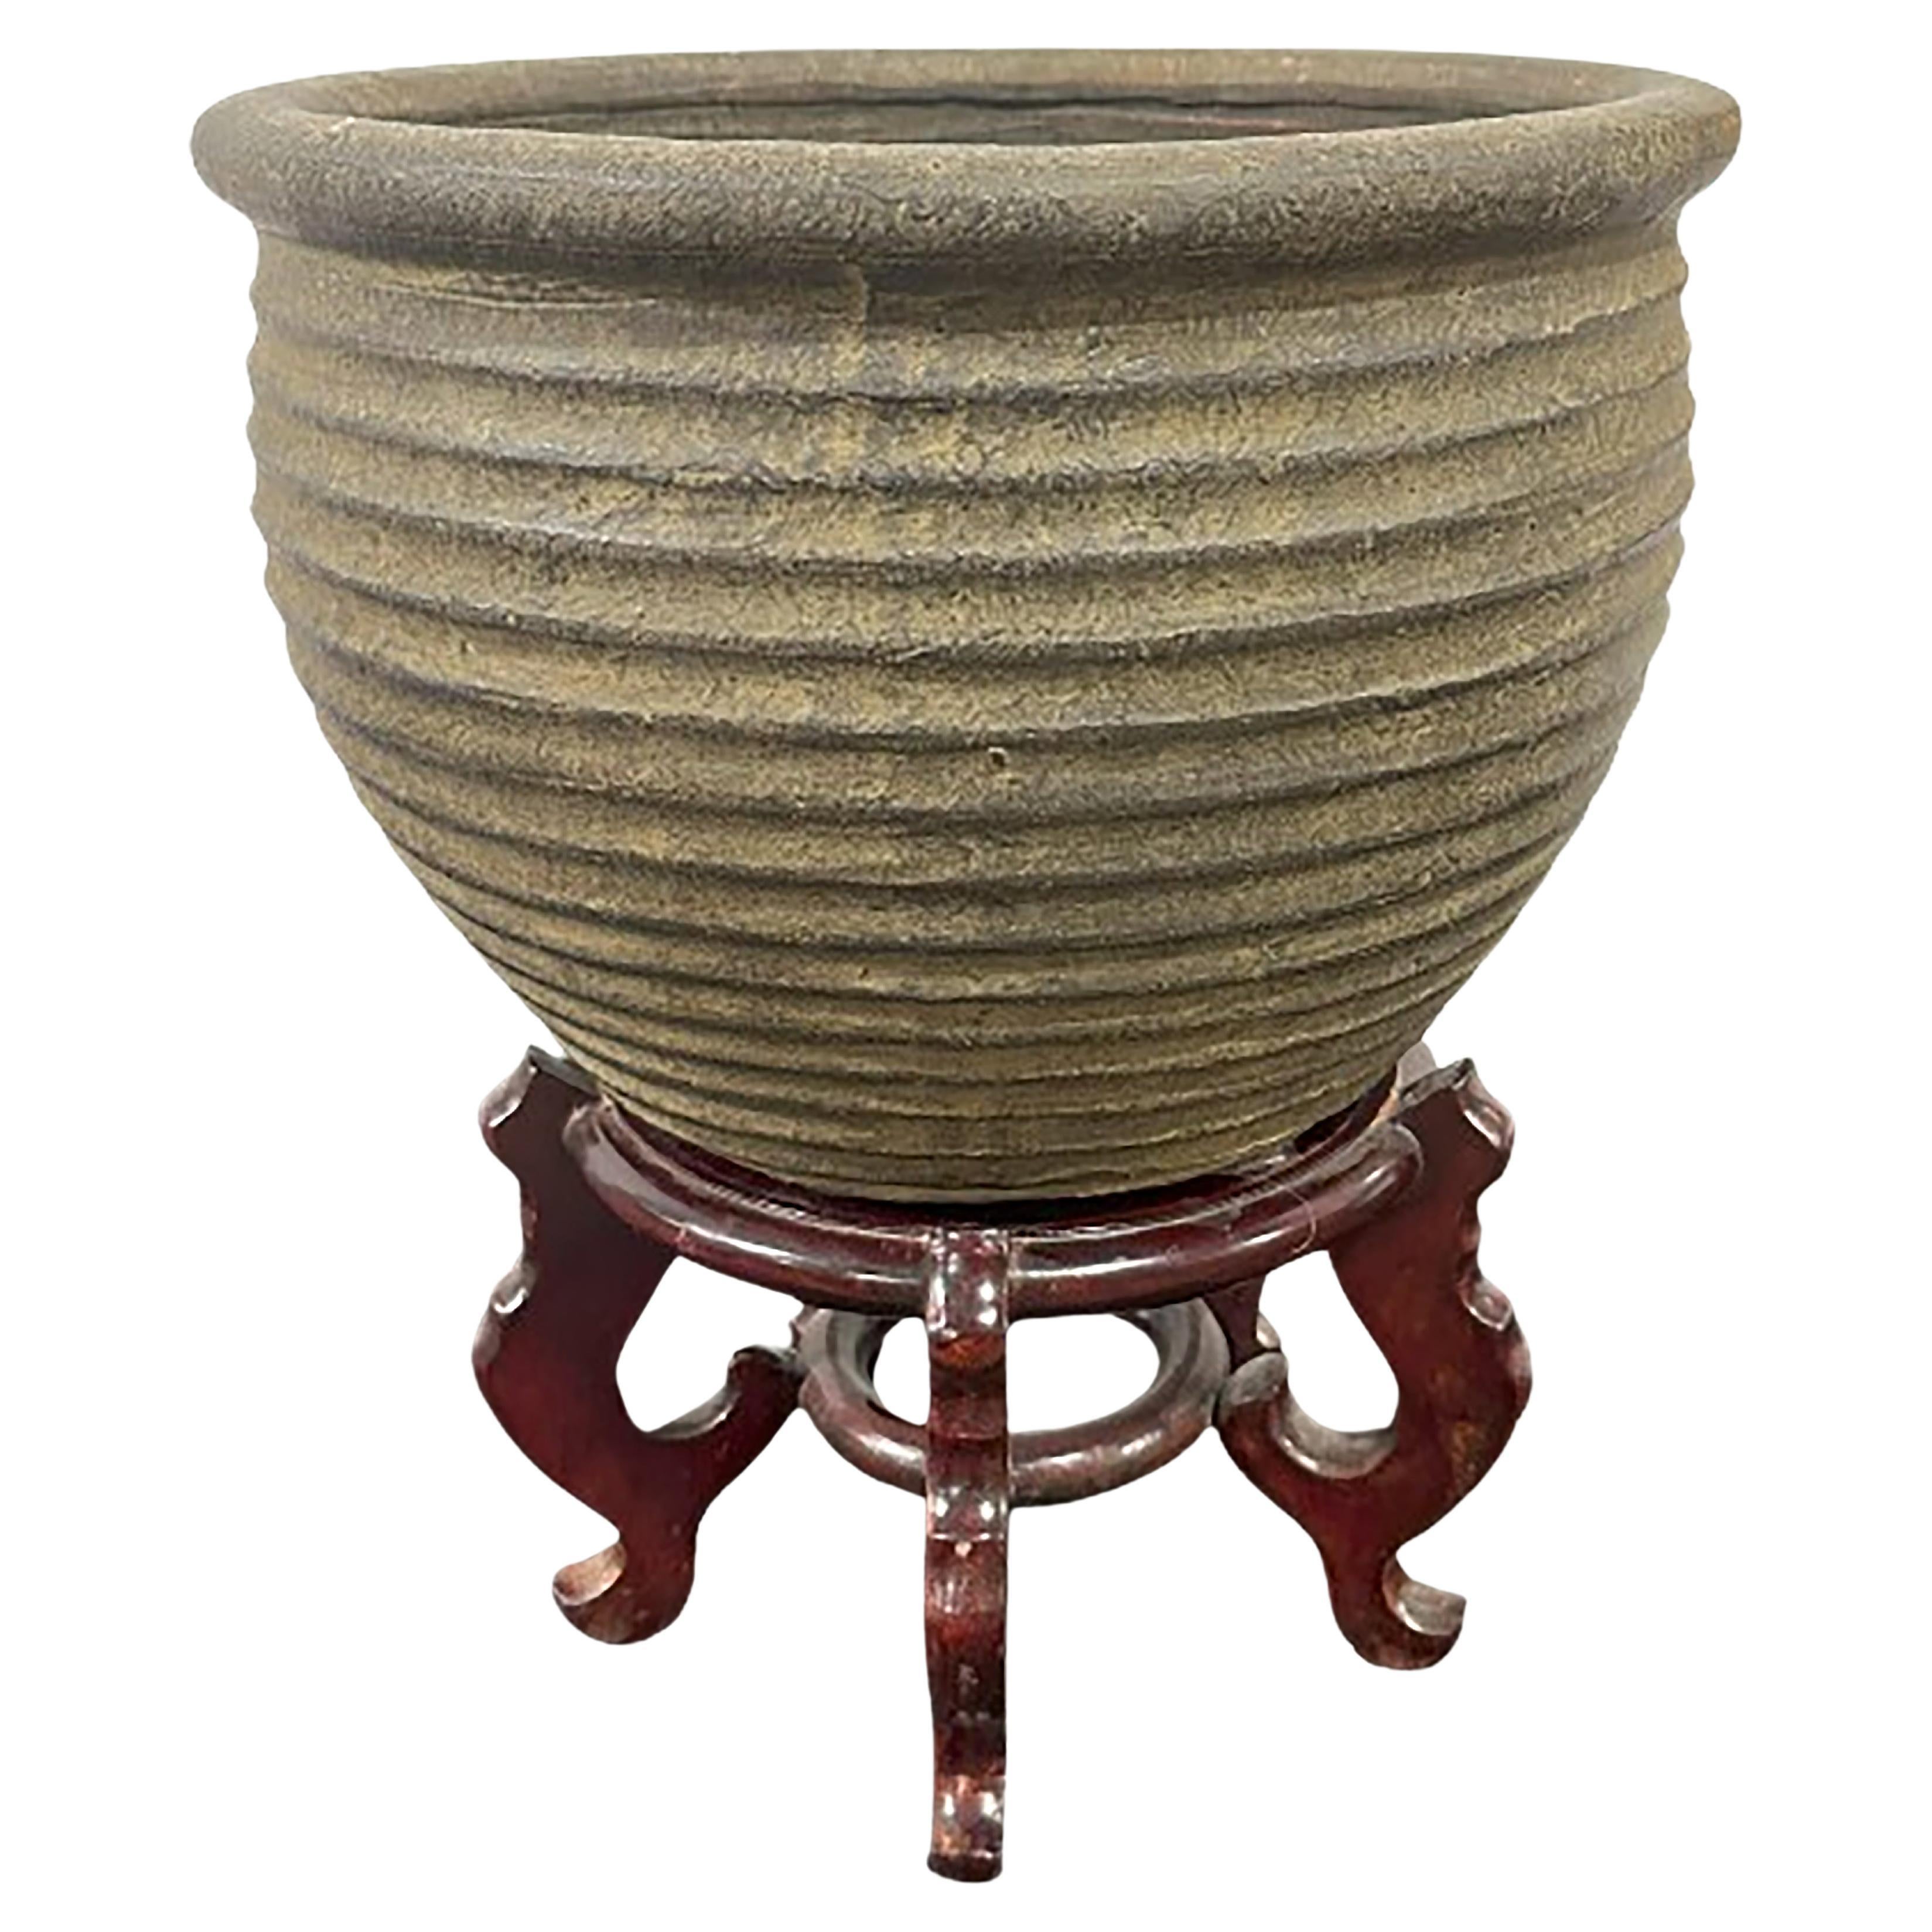   Antique Terracotta Planter with Carved Cherrywood Chinese lacquered Base